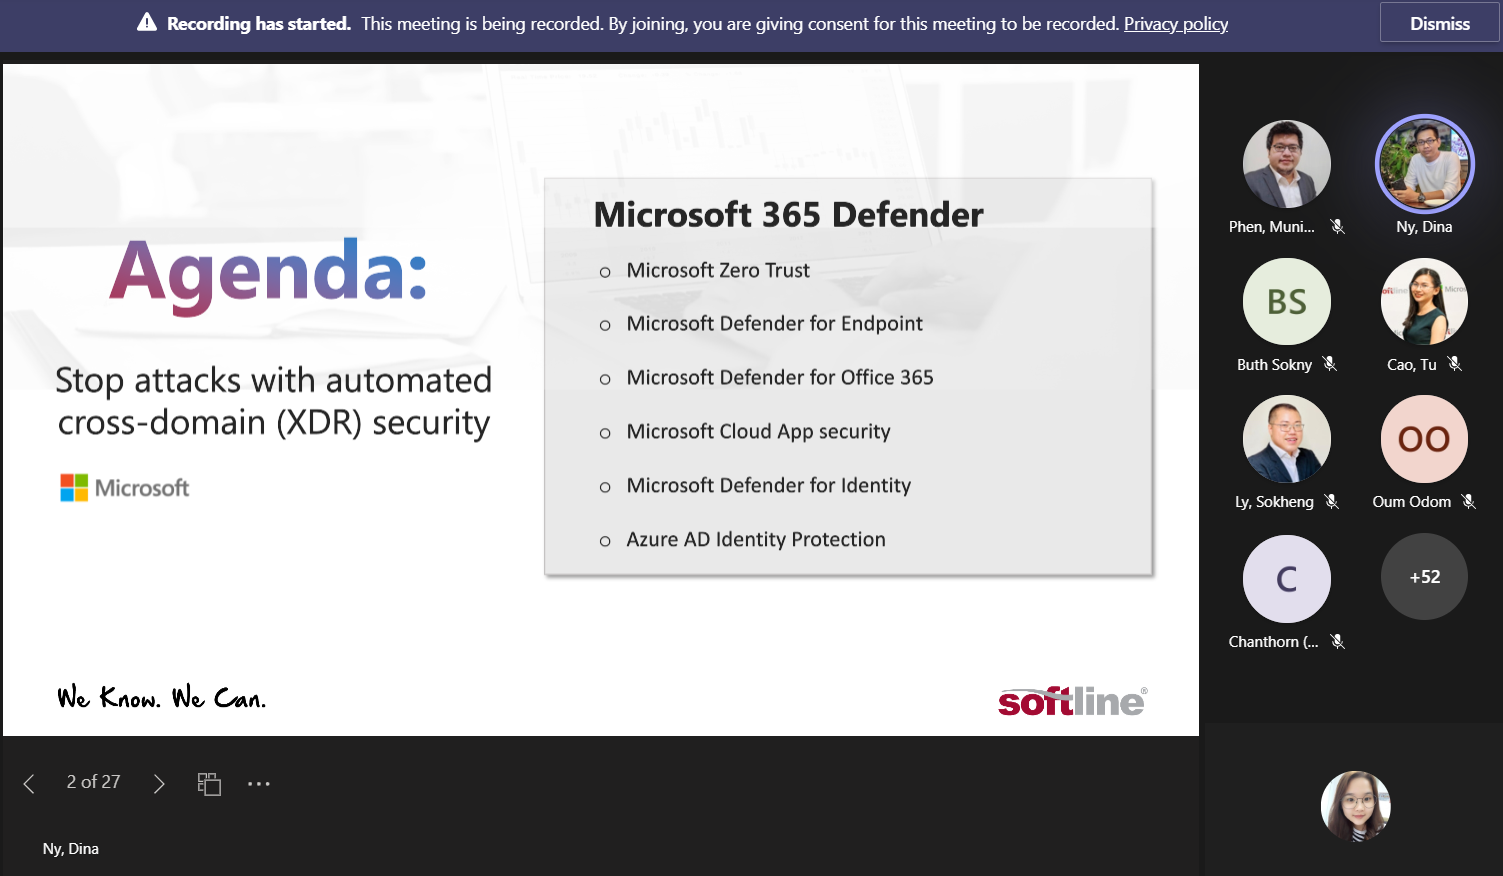 Microsoft 365 Defender -Stop attacks with automated cross-domain (XDR) security